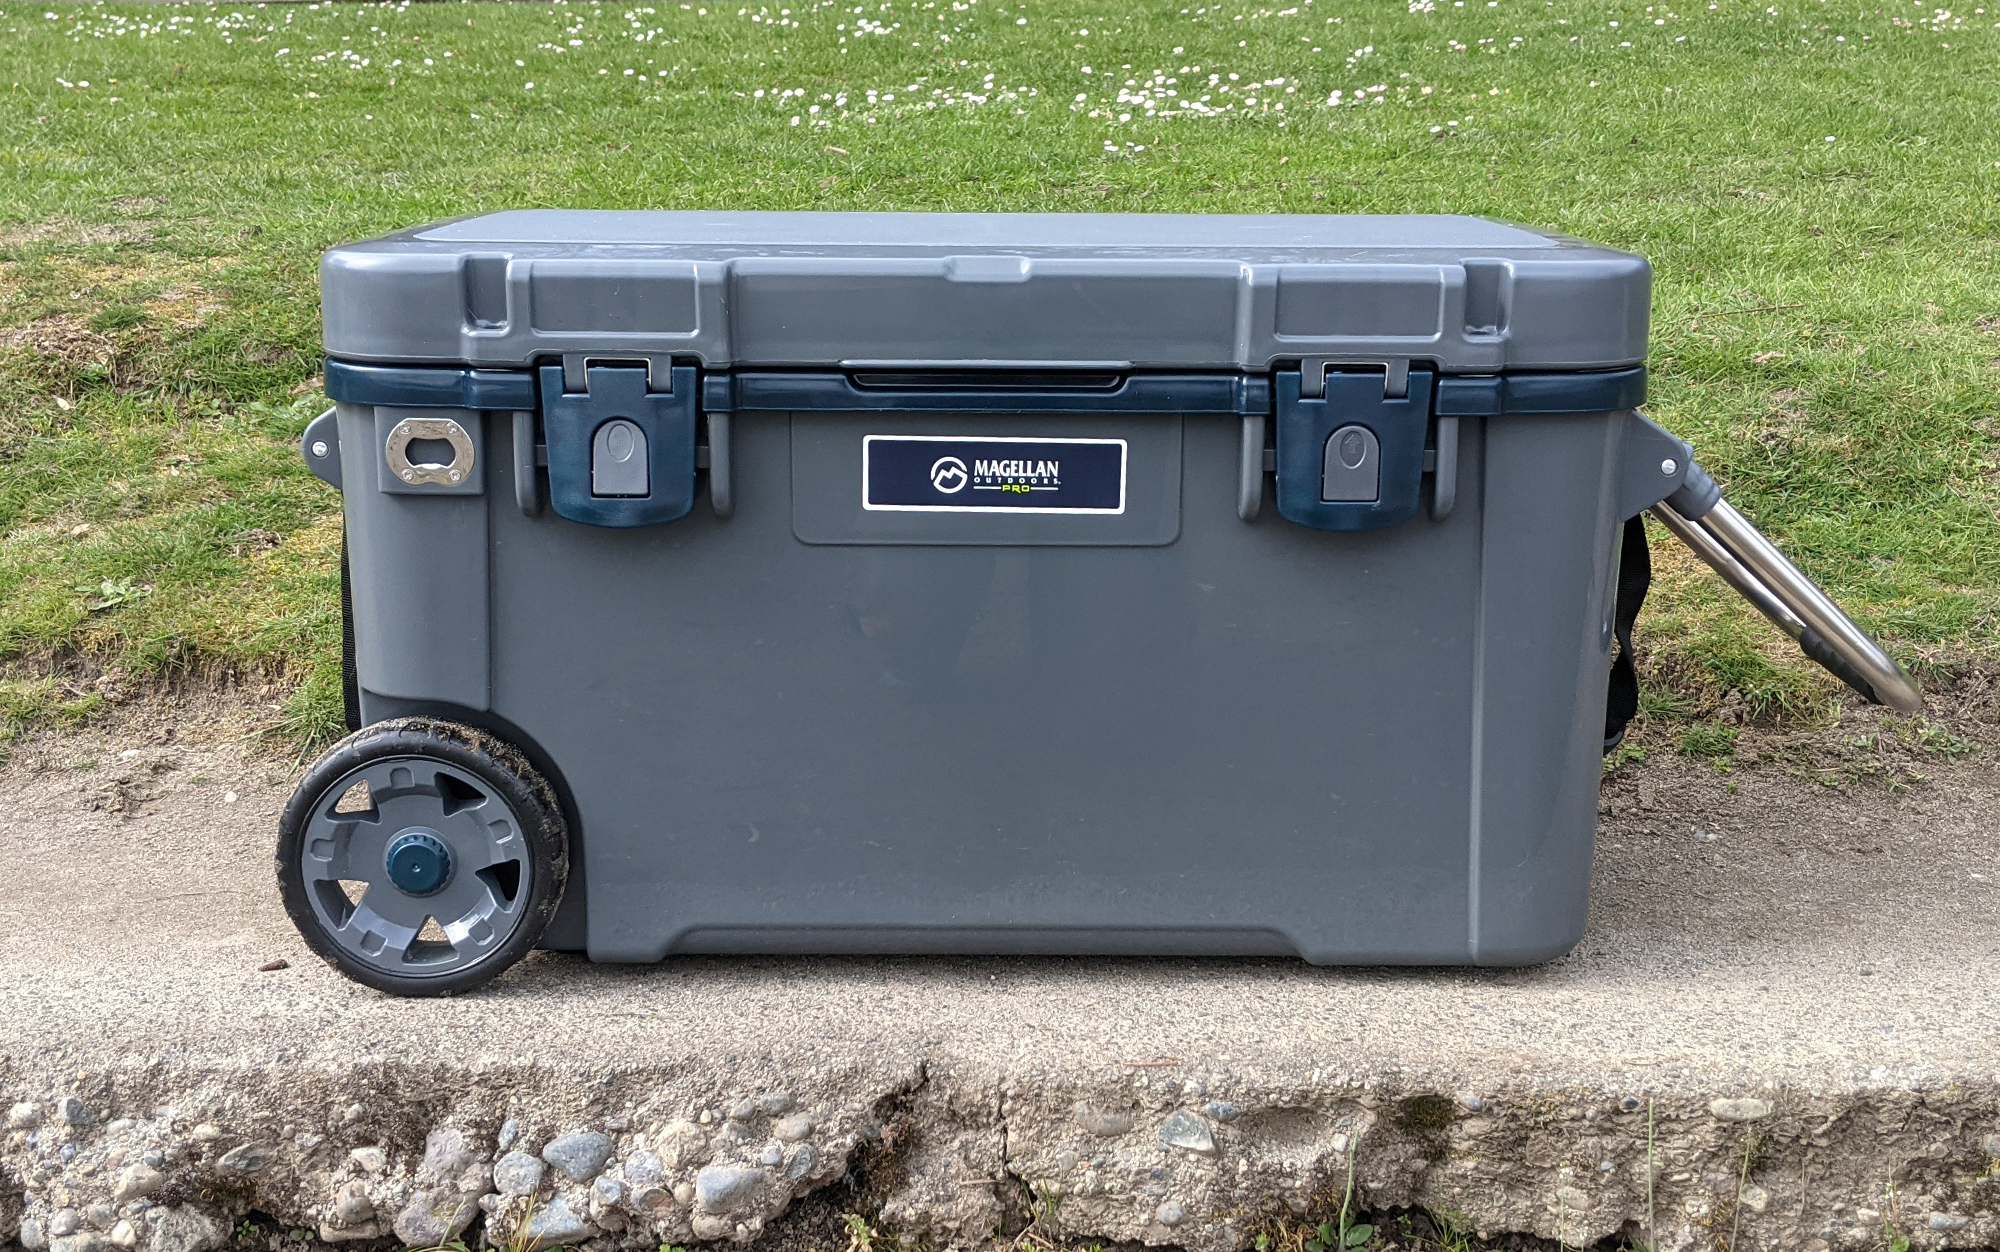 We tested the Magellan Outdoors Pro Explore Icebox 45-QT.